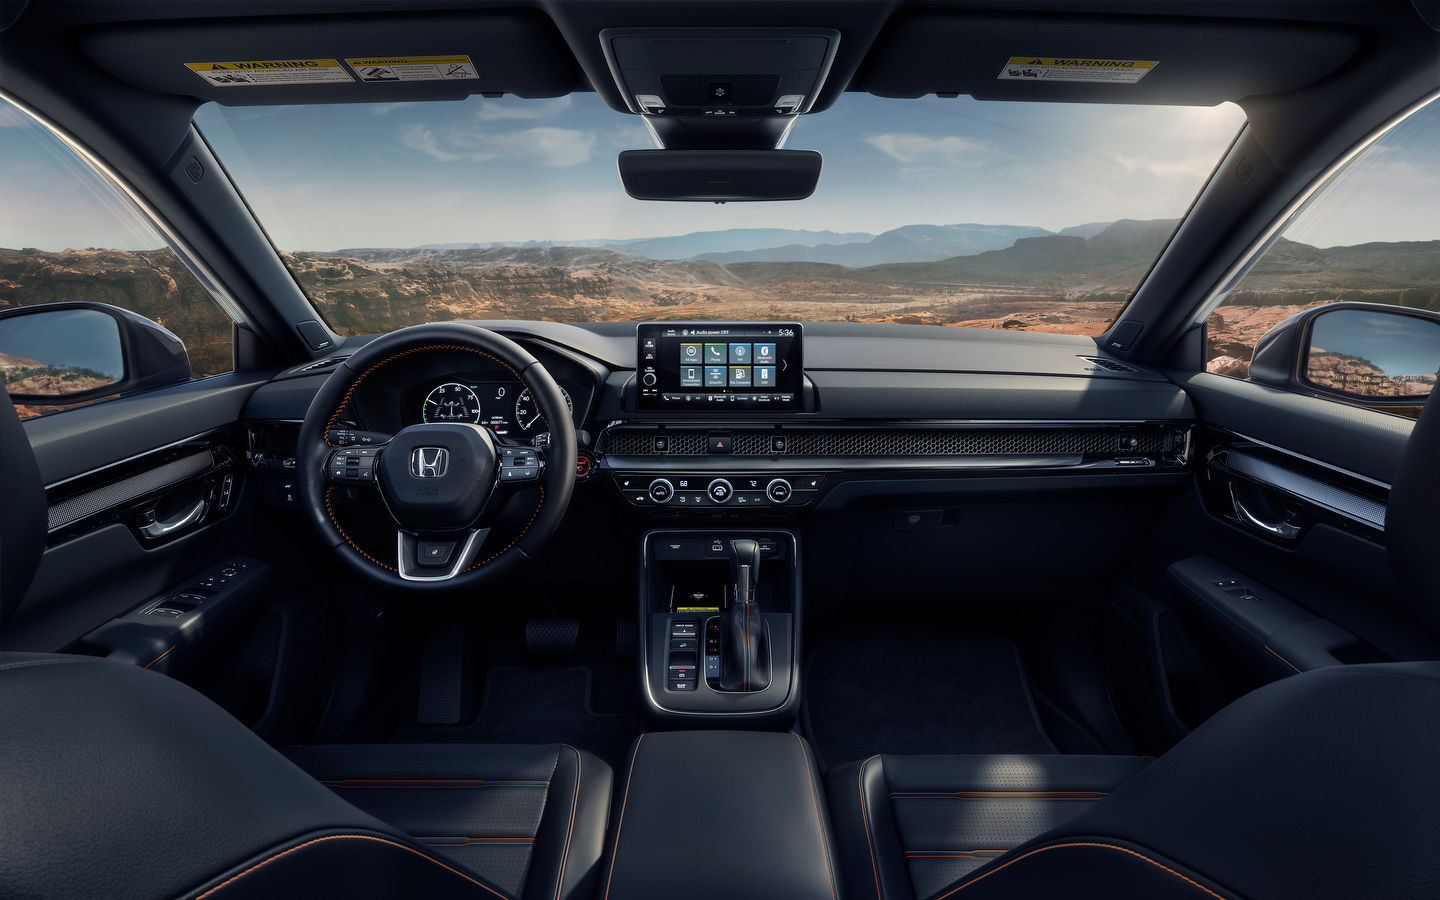 This is the interior of the new 2023 Honda CR-V